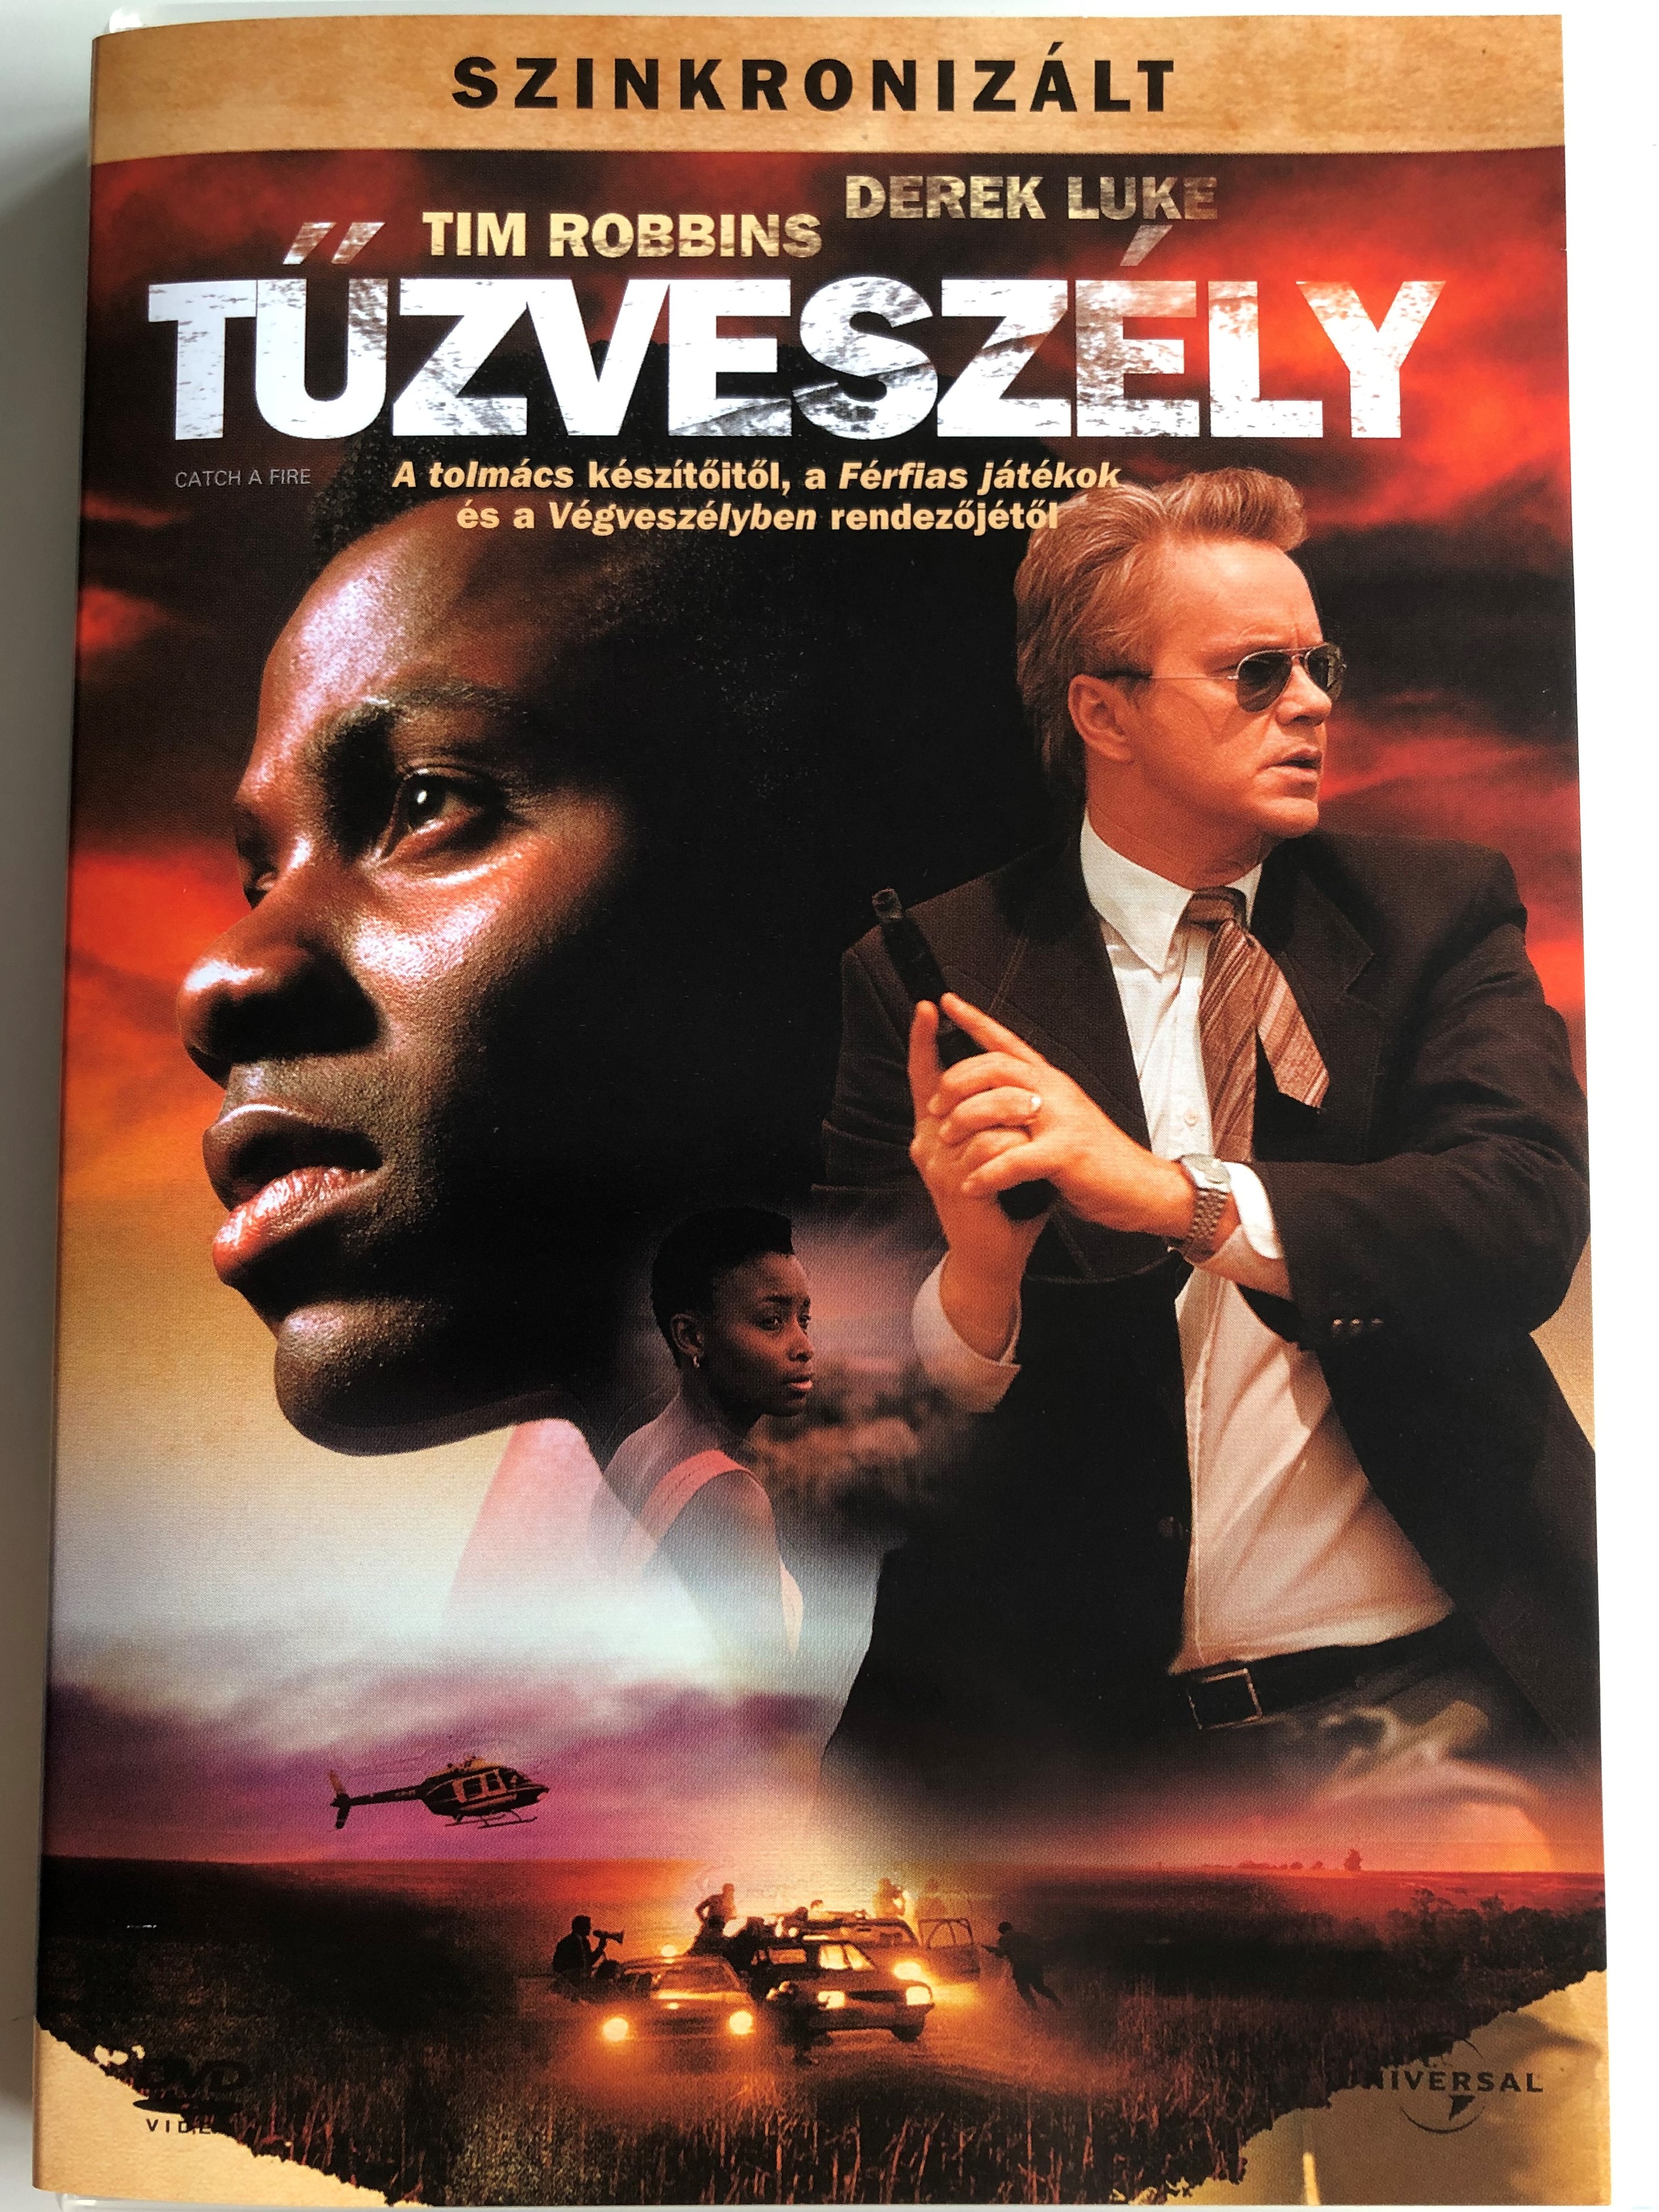 catch-a-fire-dvd-2006-t-zvesz-ly-directed-by-phillip-noyce-1.jpg